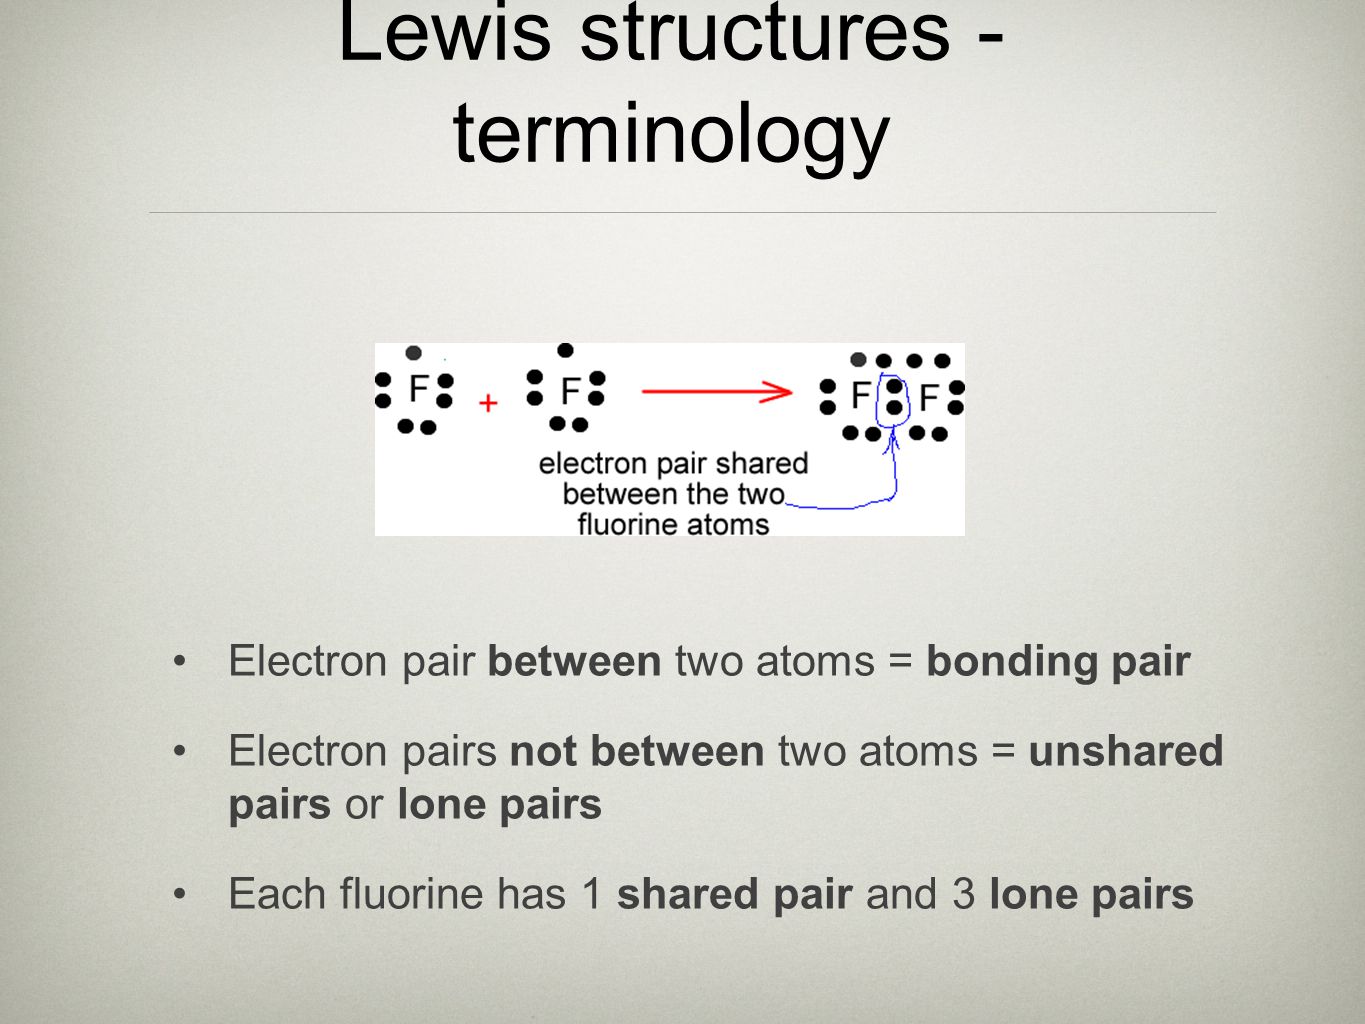 Lewis structures - terminology